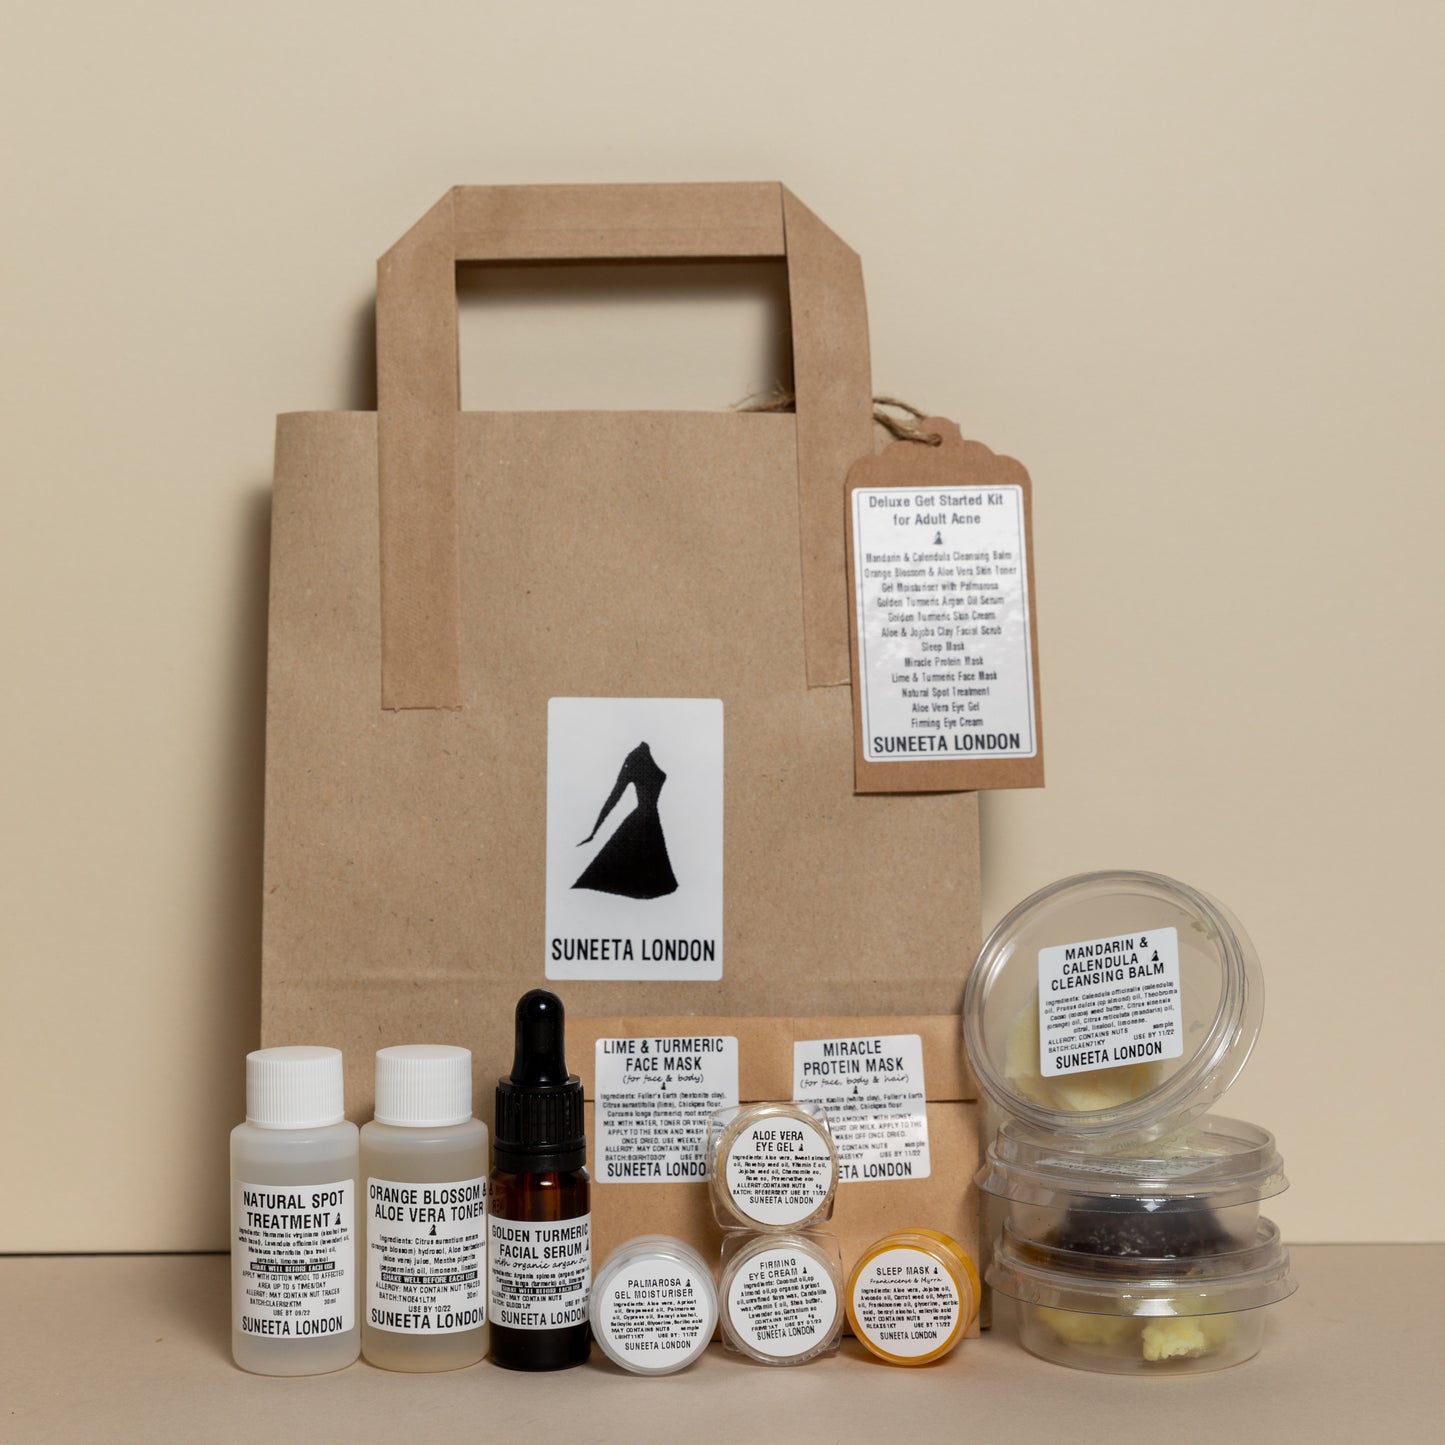 Deluxe Get Started Kit for Adult Acne